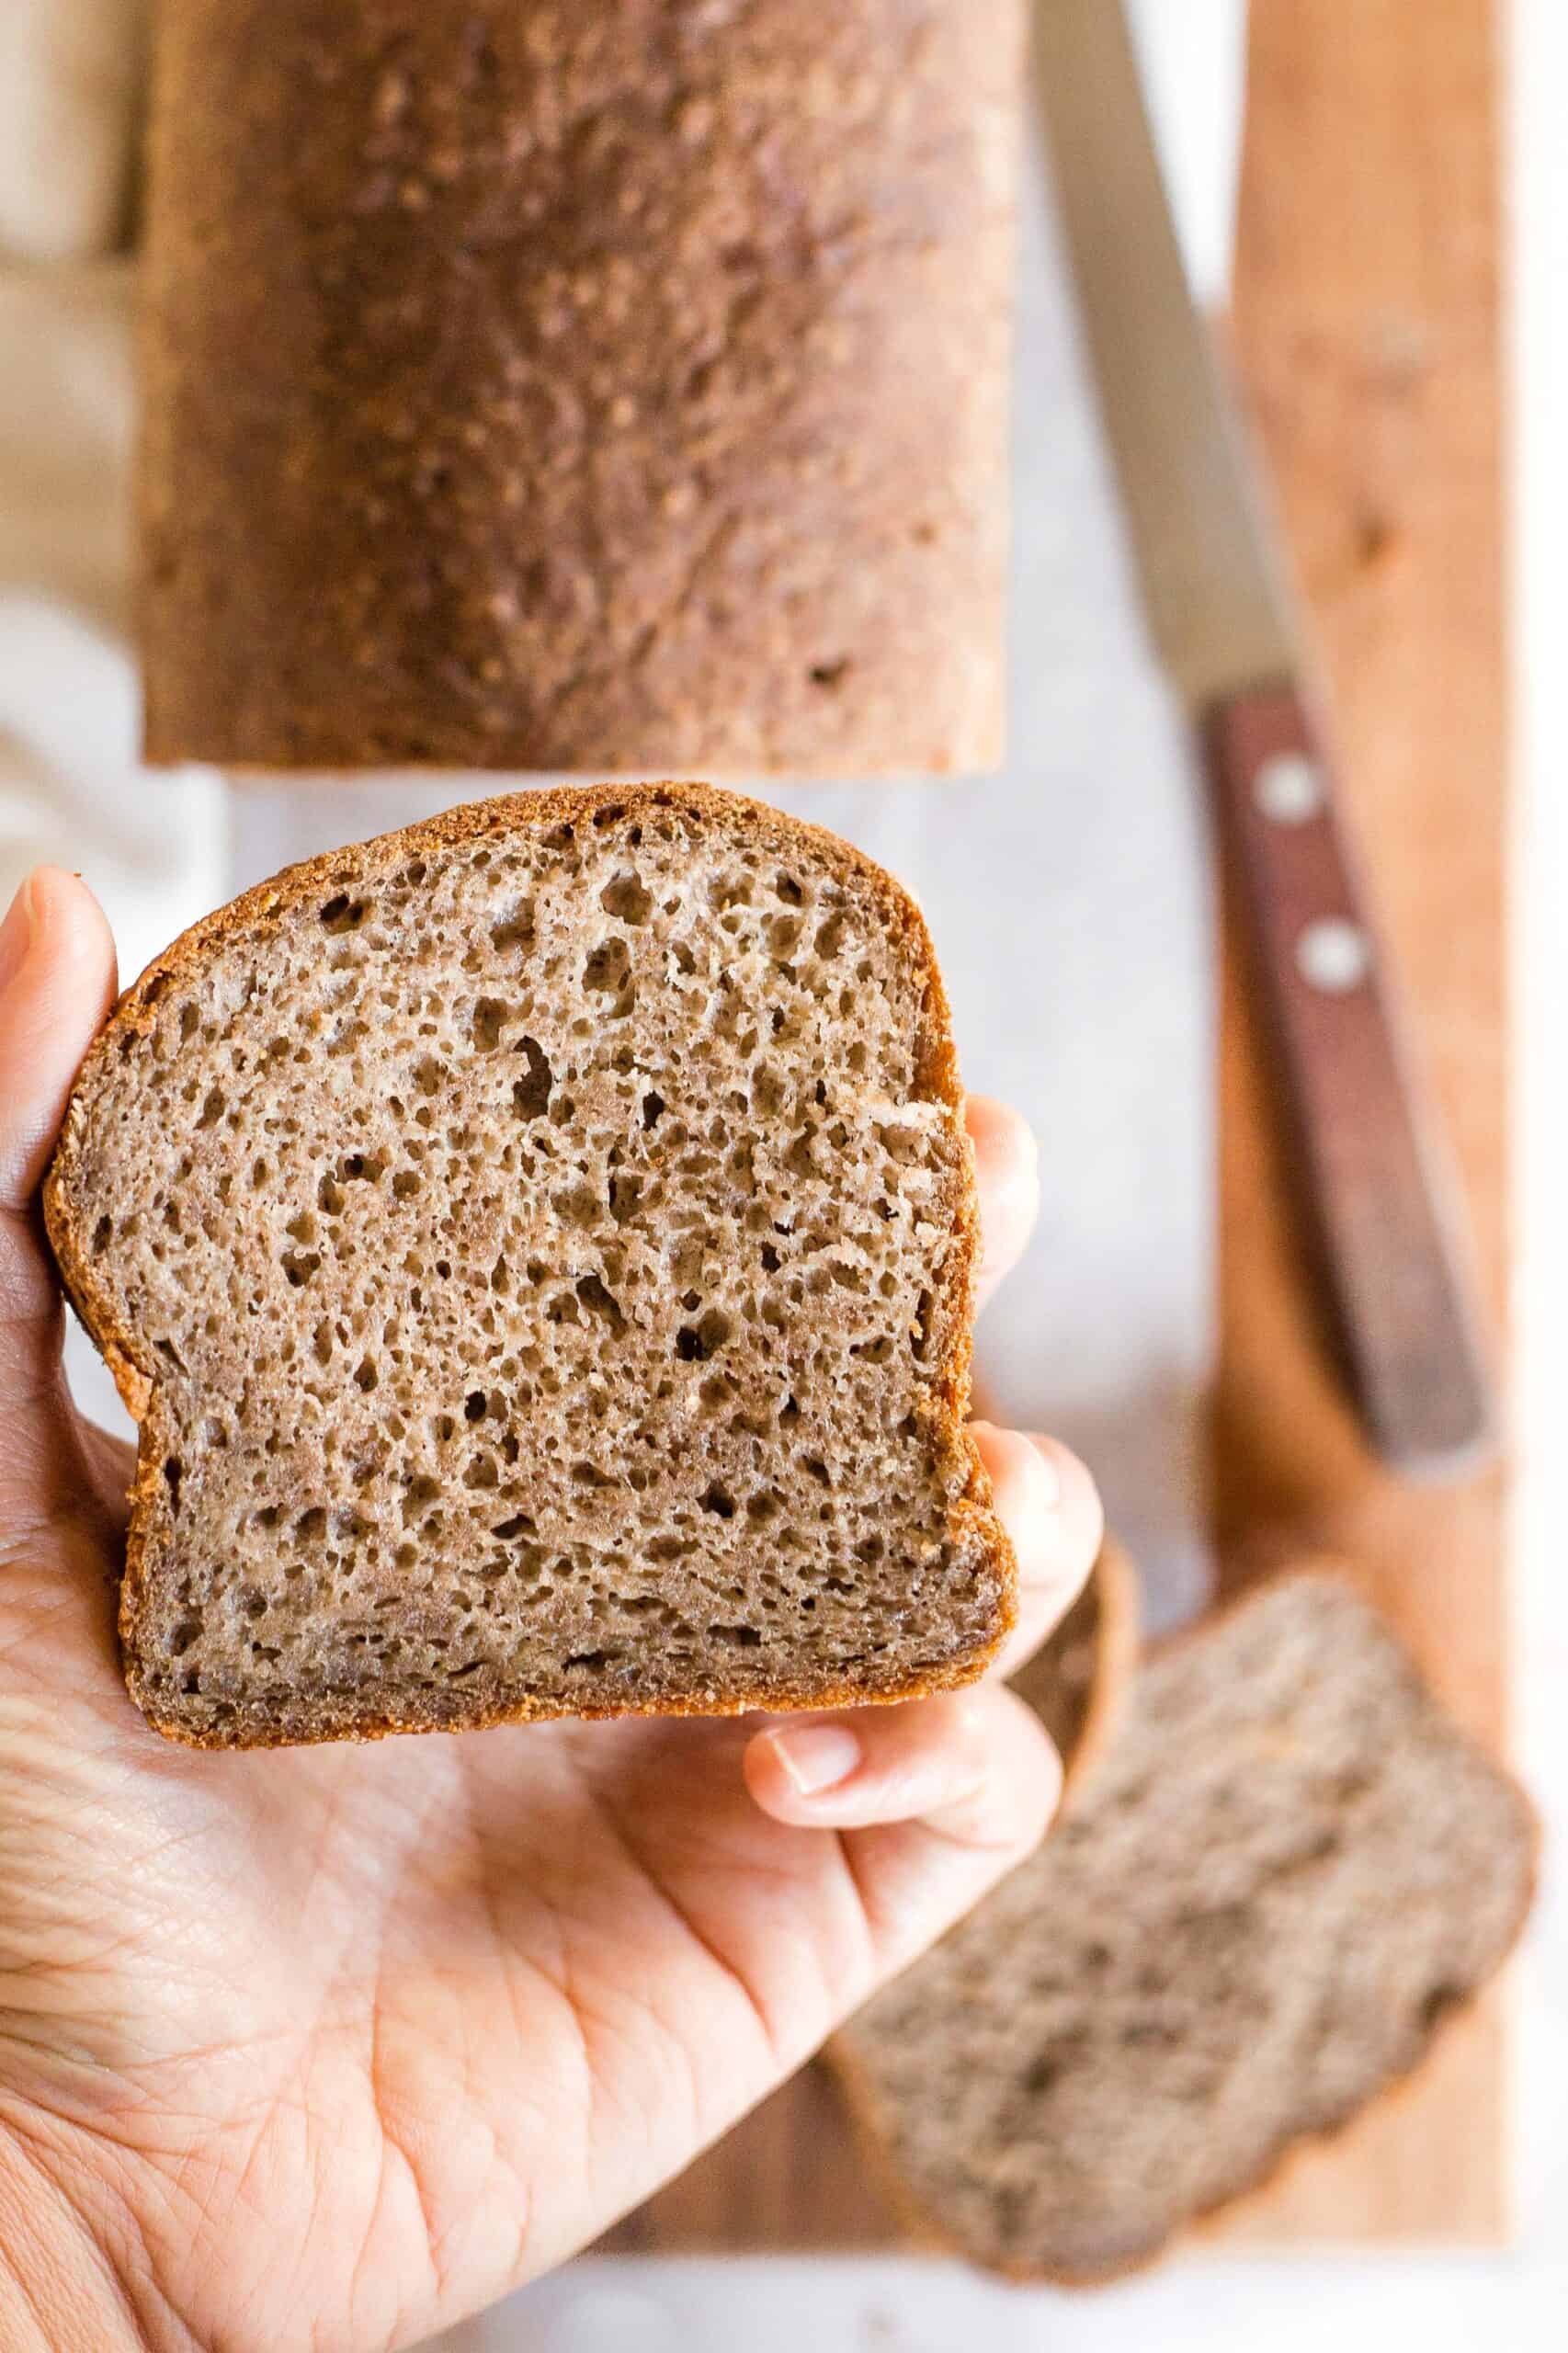 Holding up a slice of teff flour bread.